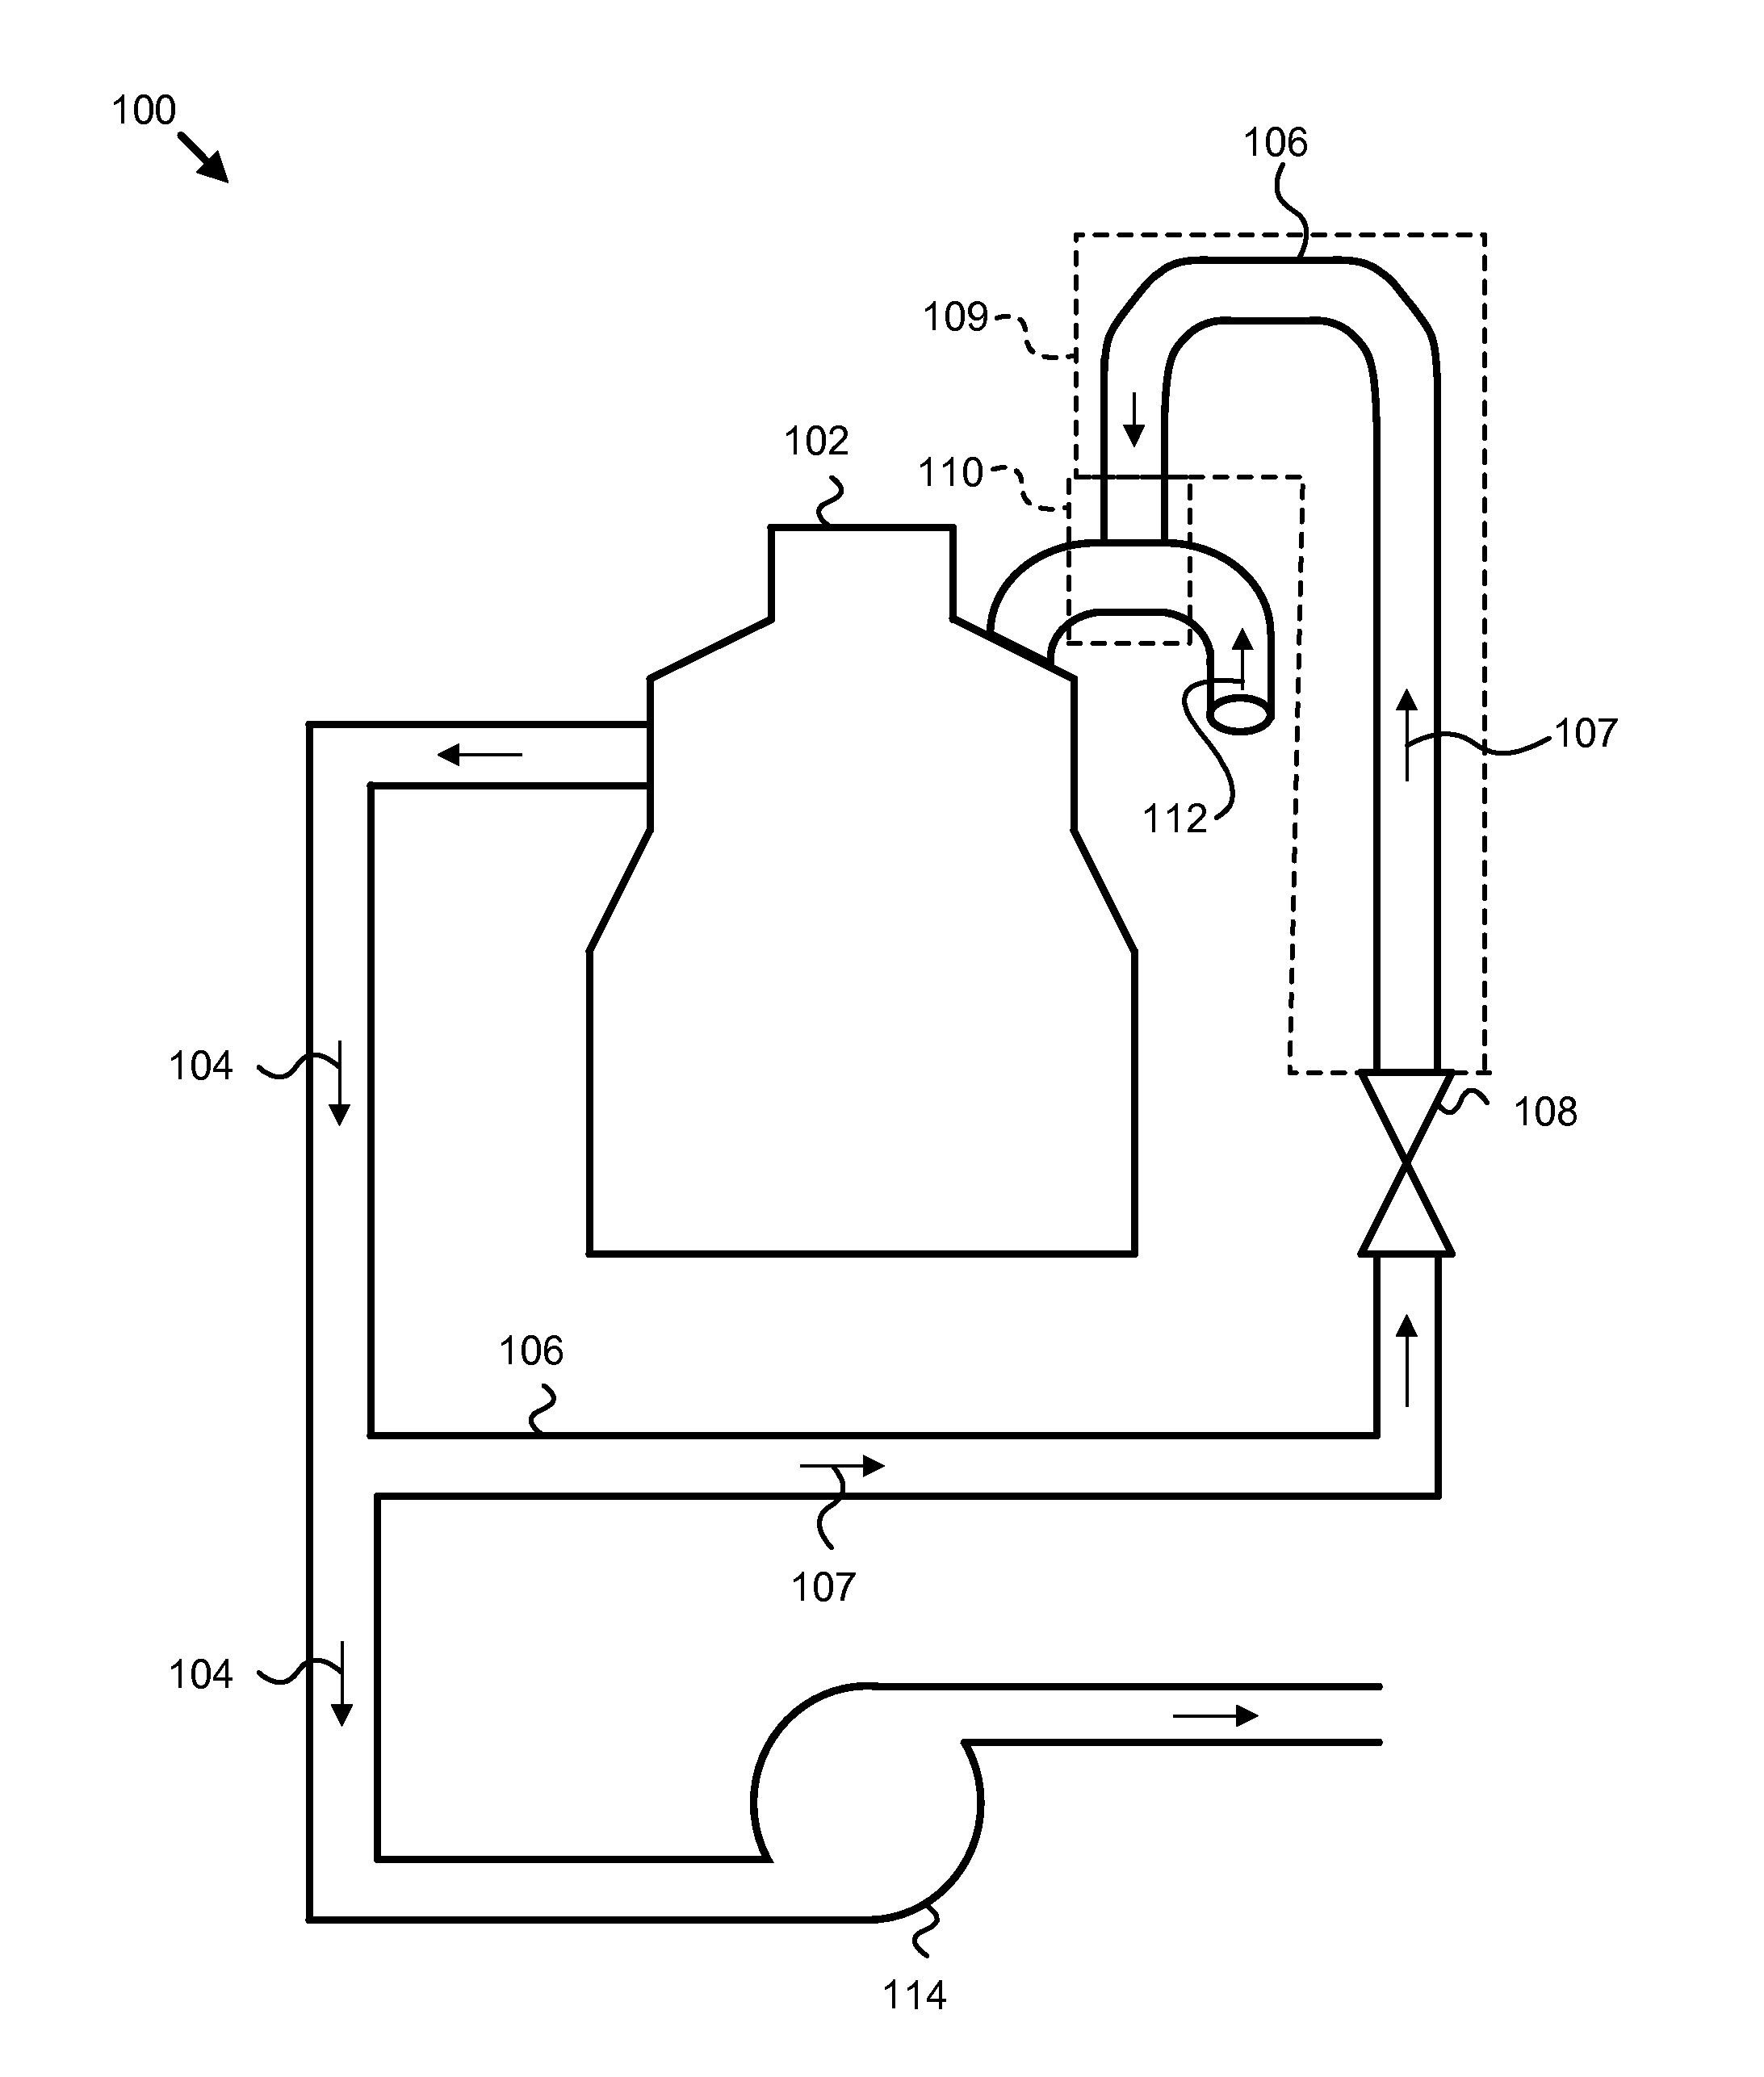 Apparatus and system for efficiently recirculating an exhaust gas in a combustion engine